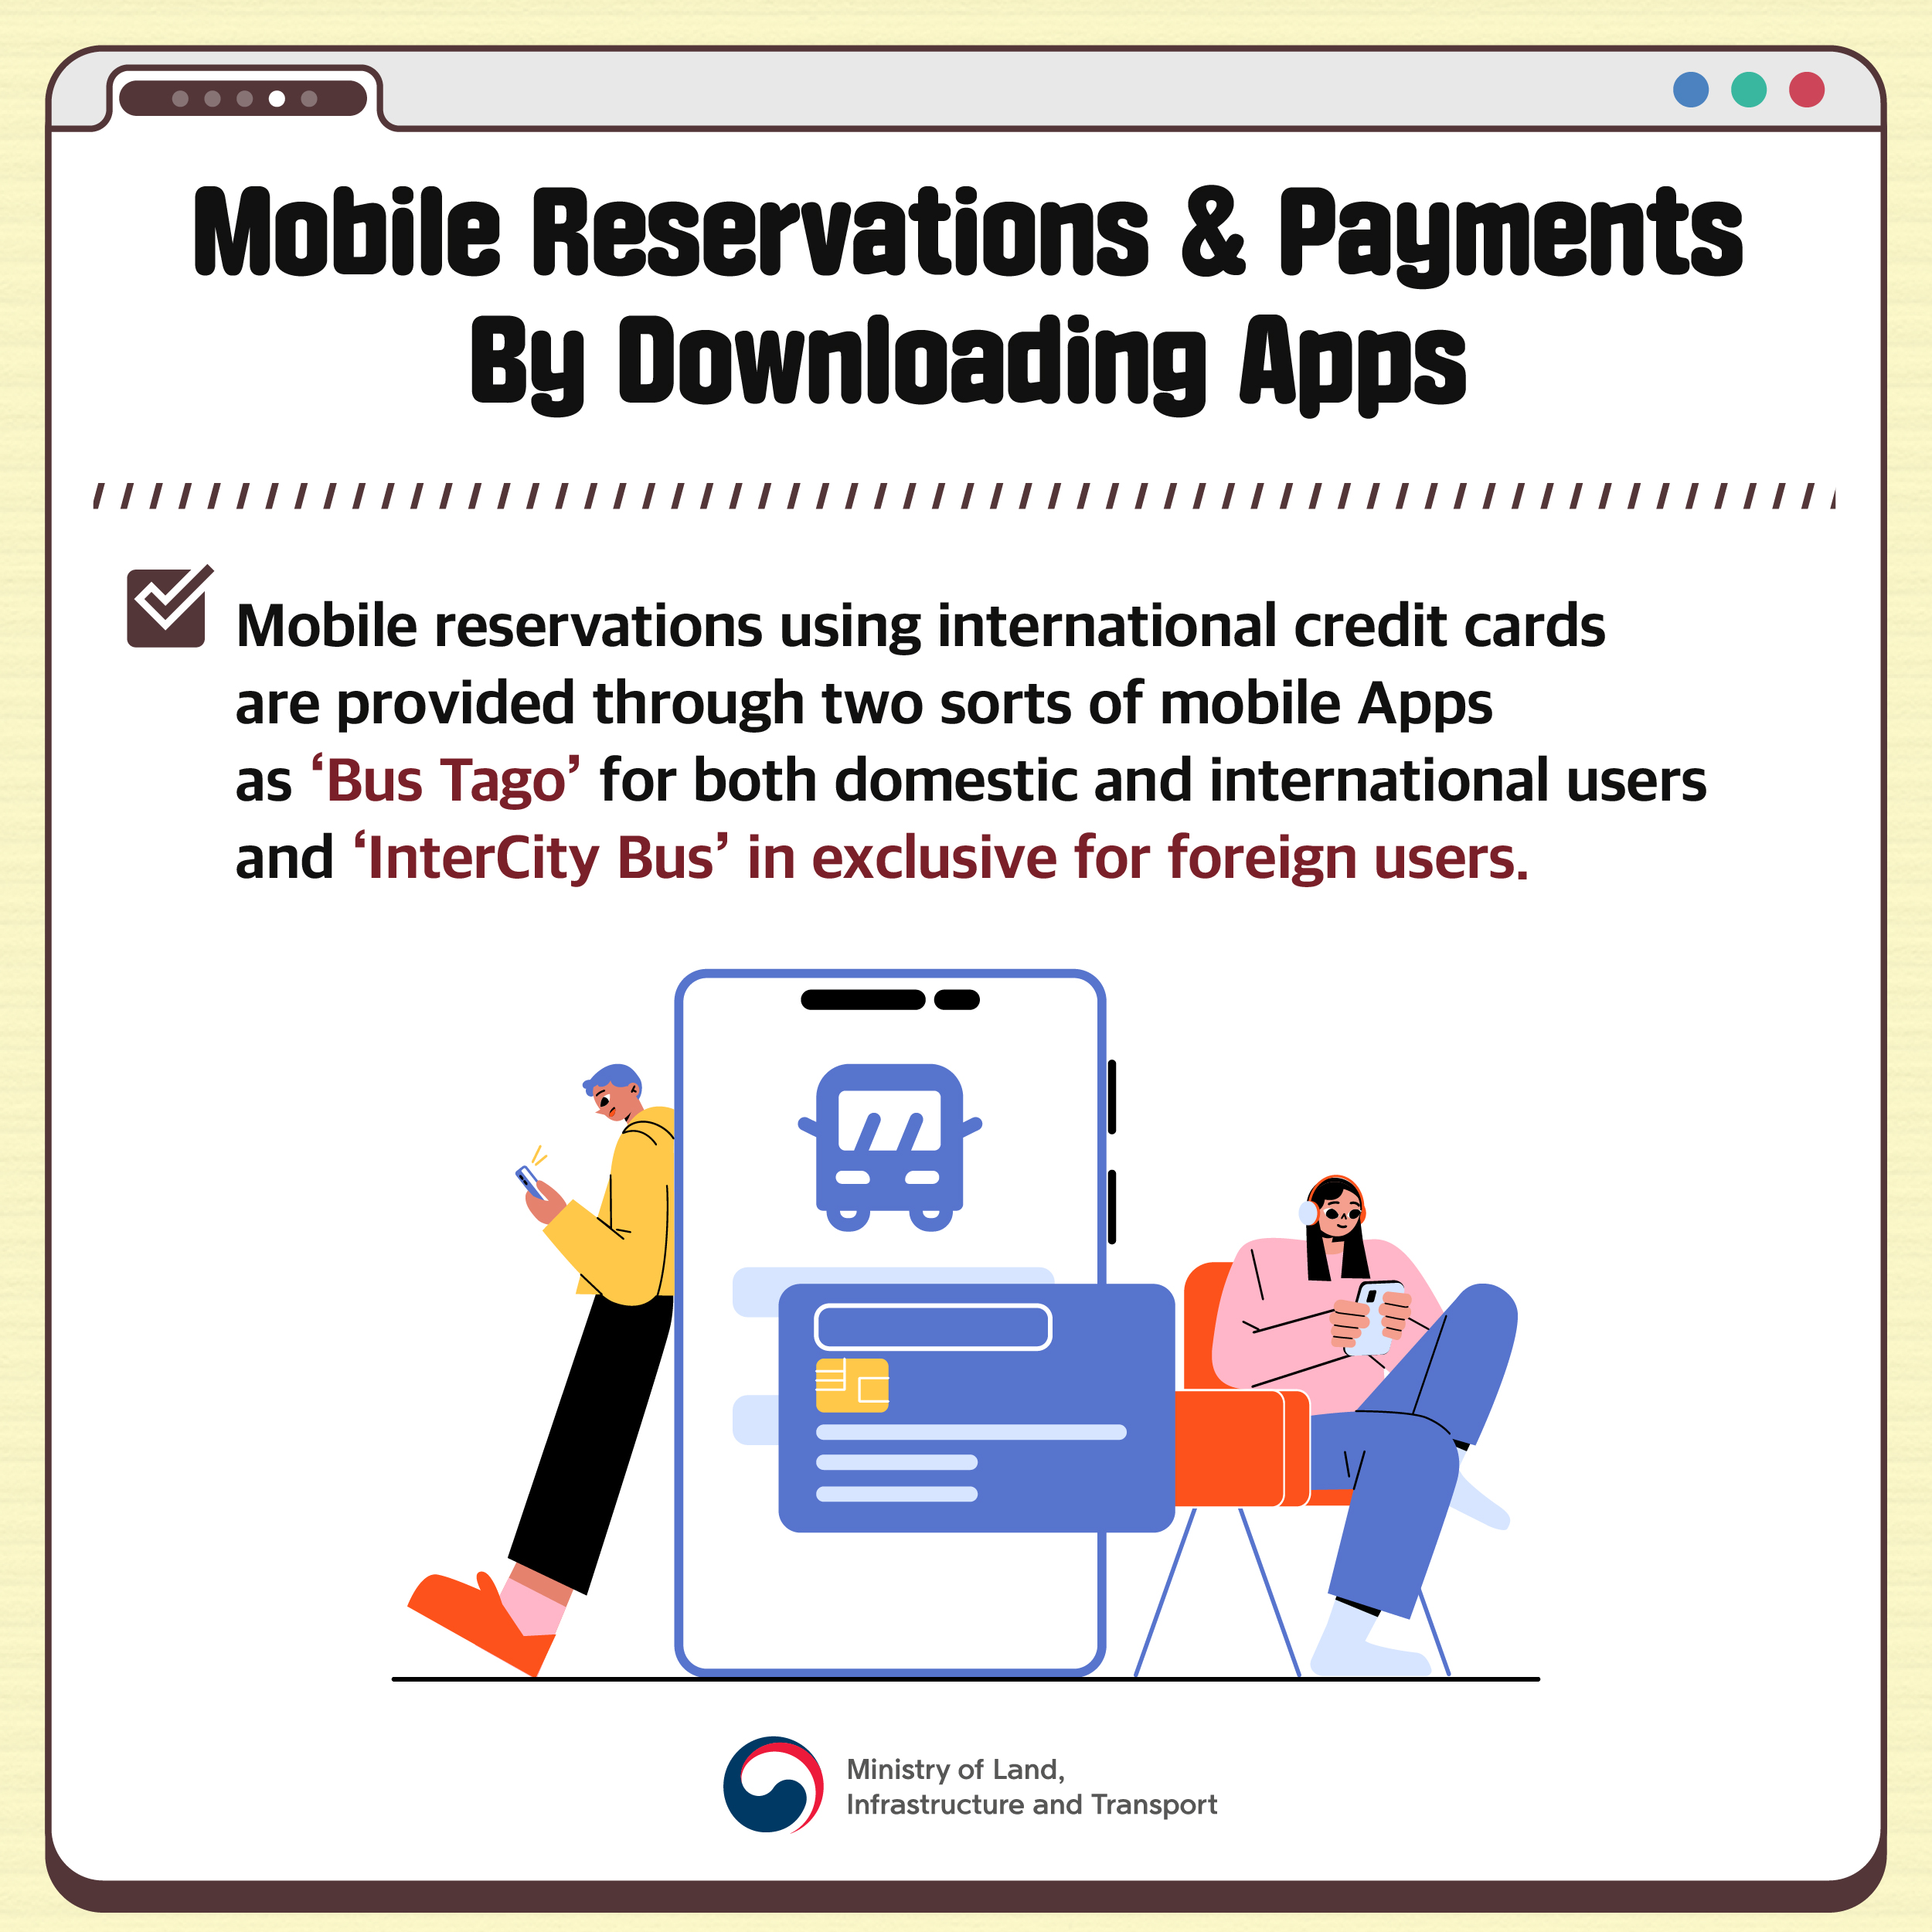 pic 5. Mobile Reservations & Payments By Downloading Apps

Mobile reservations using international credit cards are provided through two sorts of mobile Apps as ‘Bus Tago’ for both domestic and international users and ‘InterCity Bus’ in exclusive for foreign users.